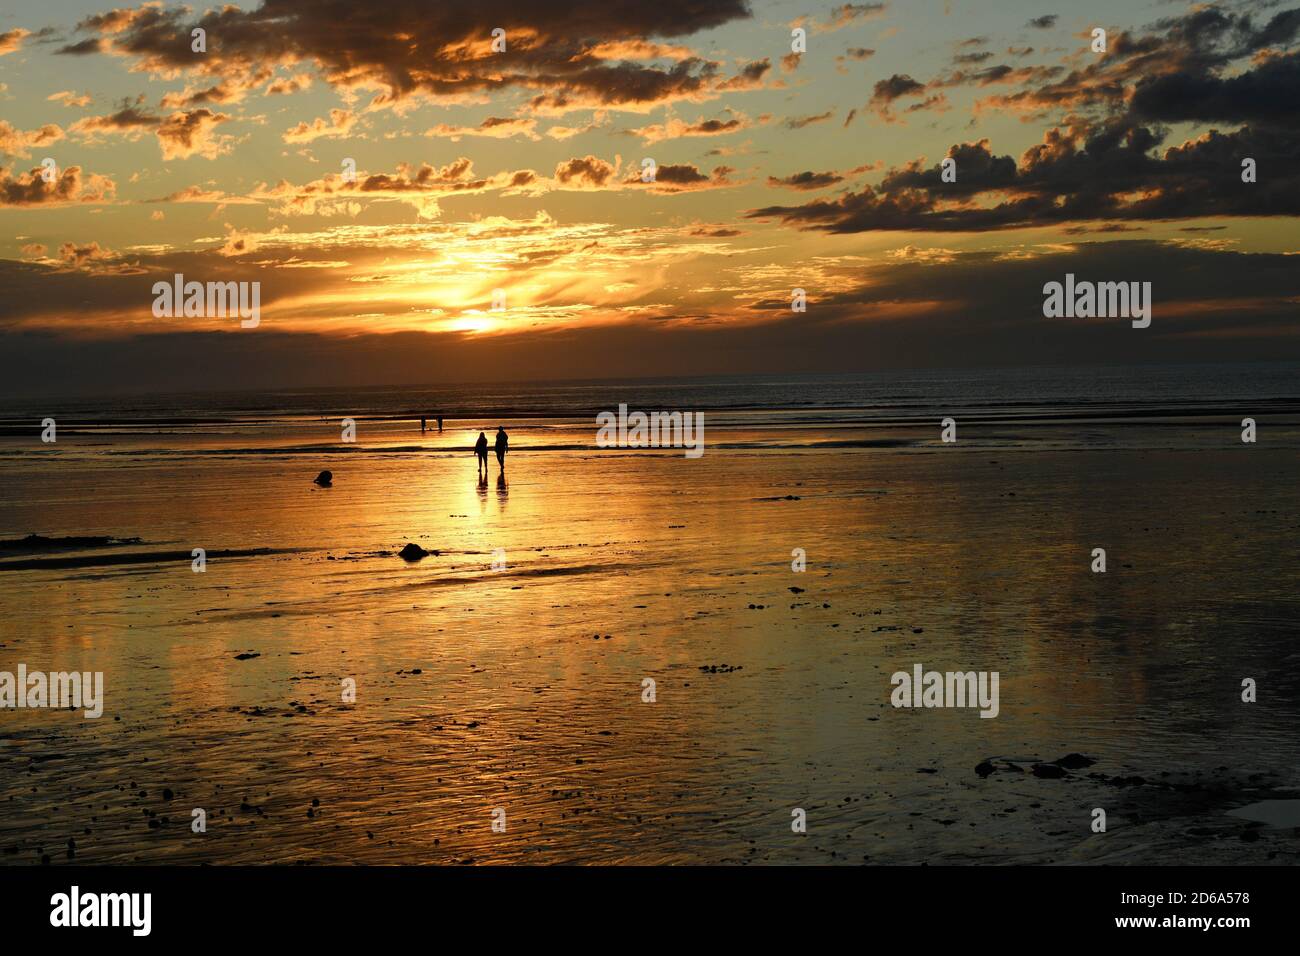 Sunset on the Atlantic ocean in Normandy, Dieppe, France. Stock Photo